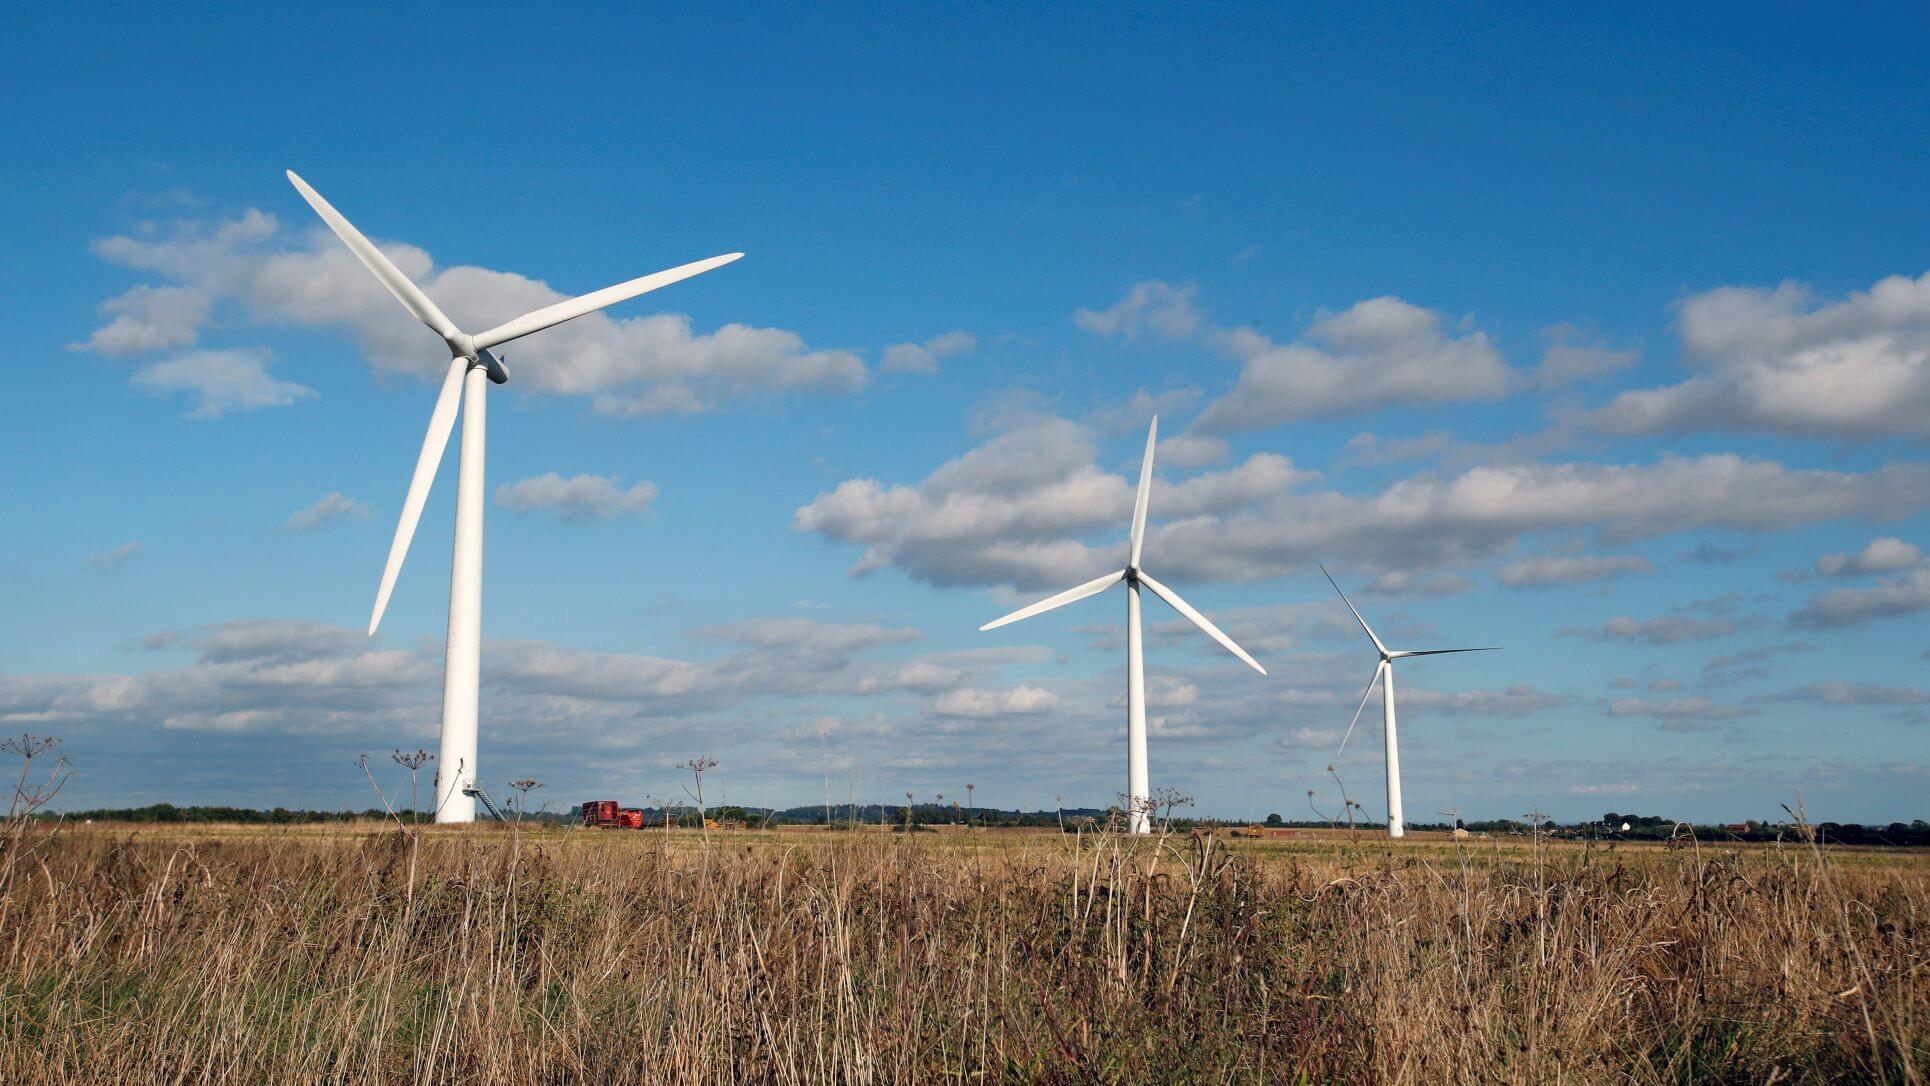 Britain Plans 'De-Facto Windfall Tax' On Low-Carbon Energy Producers